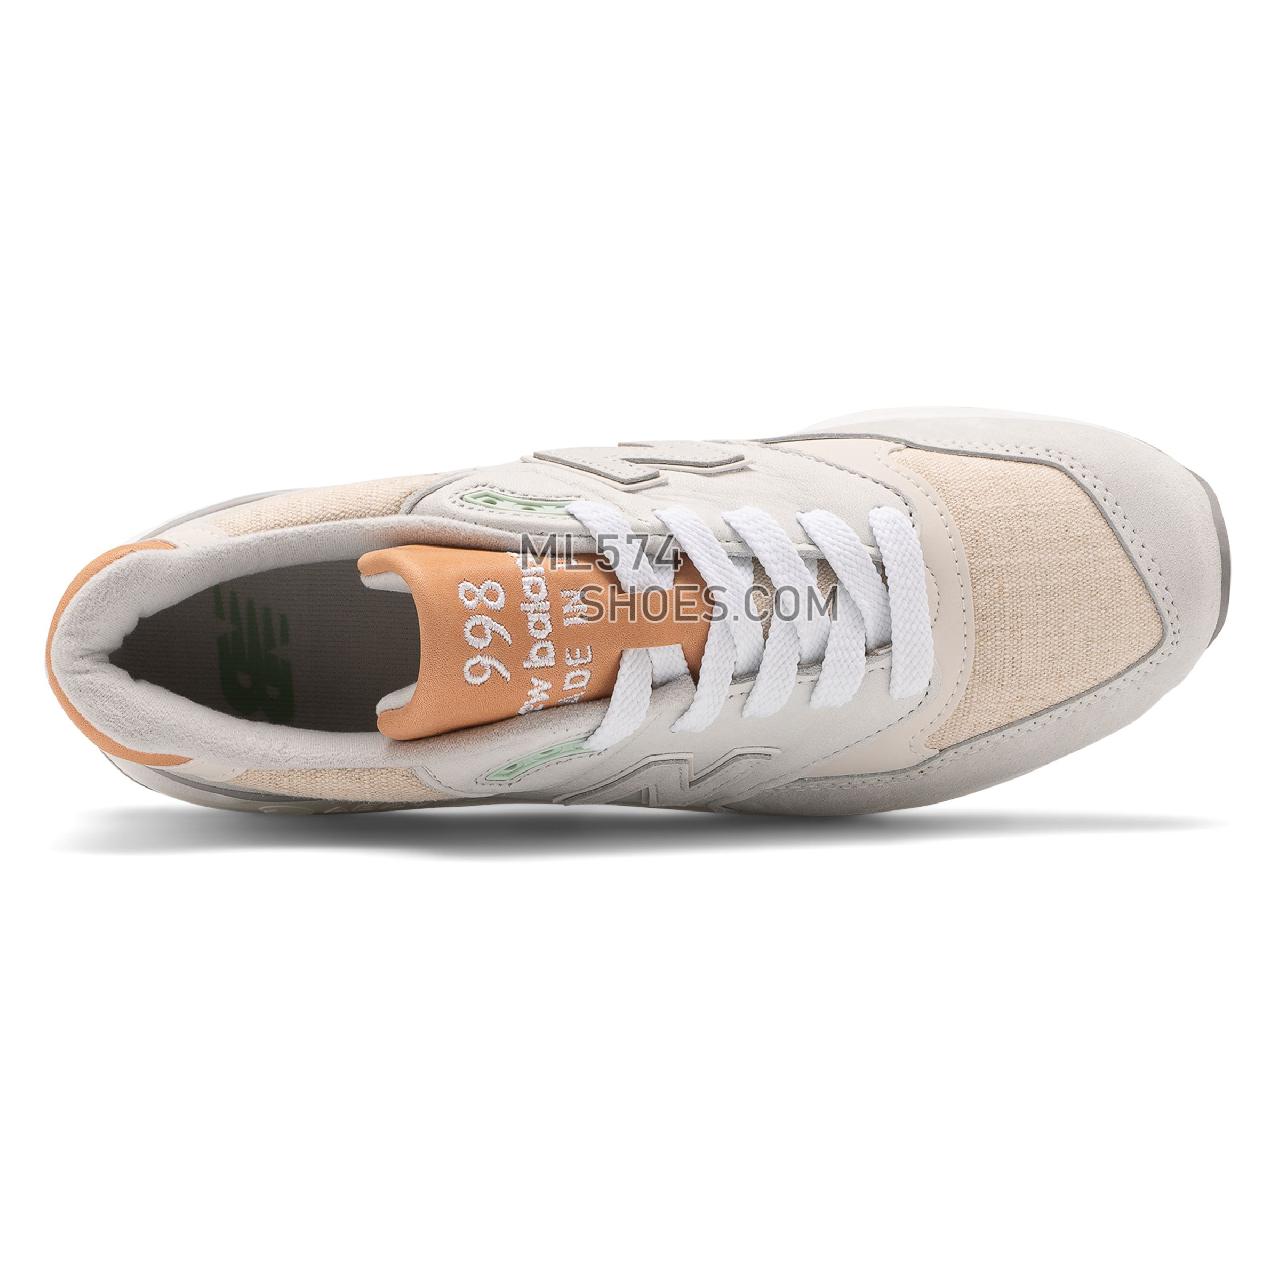 New Balance Made in USA 998 - Men's Made in USA And UK Sneakers - White with Tan - M998ENE